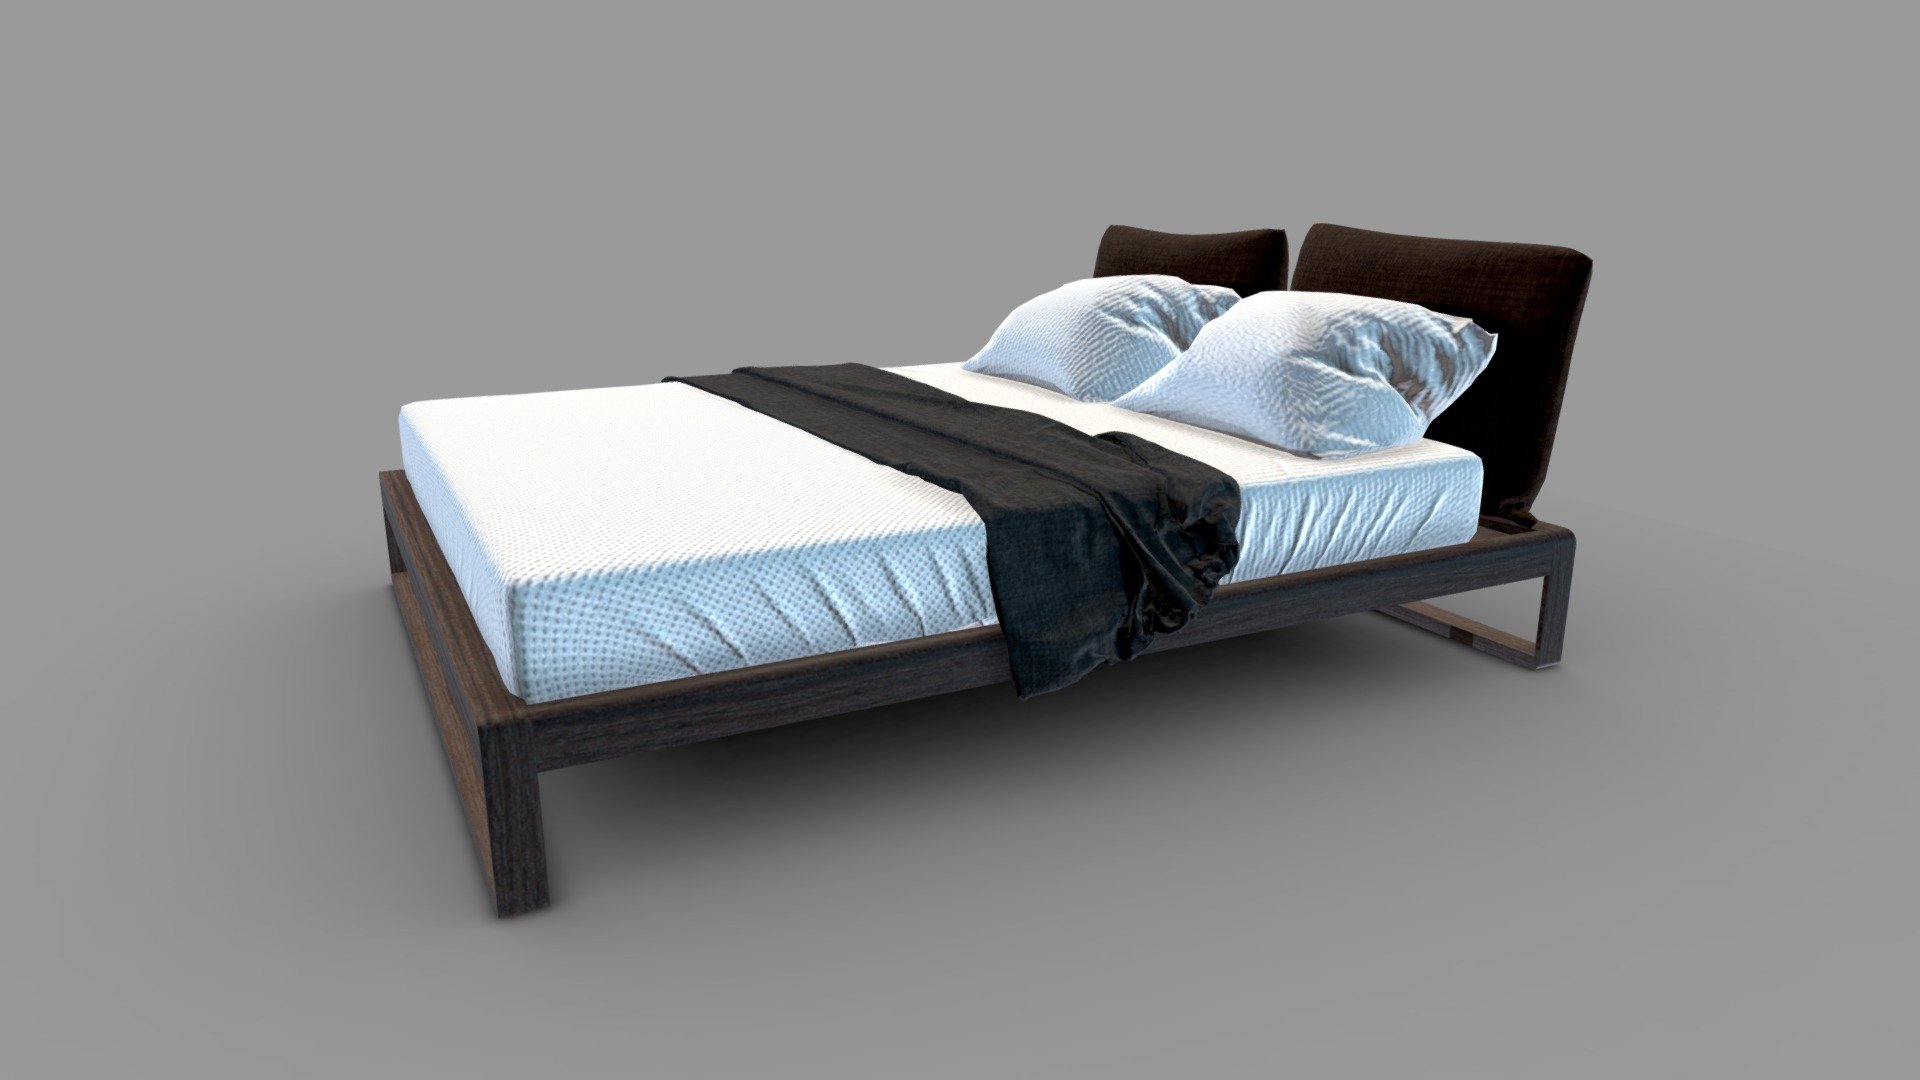 Hi-quality models of bed in modern style. The model was done basing on real prototype photo. We design in real 3D, making scale structural models out of the same material that could be made in real world. Model will be suitable well both for augmented/virtual visualization and for games 3d model